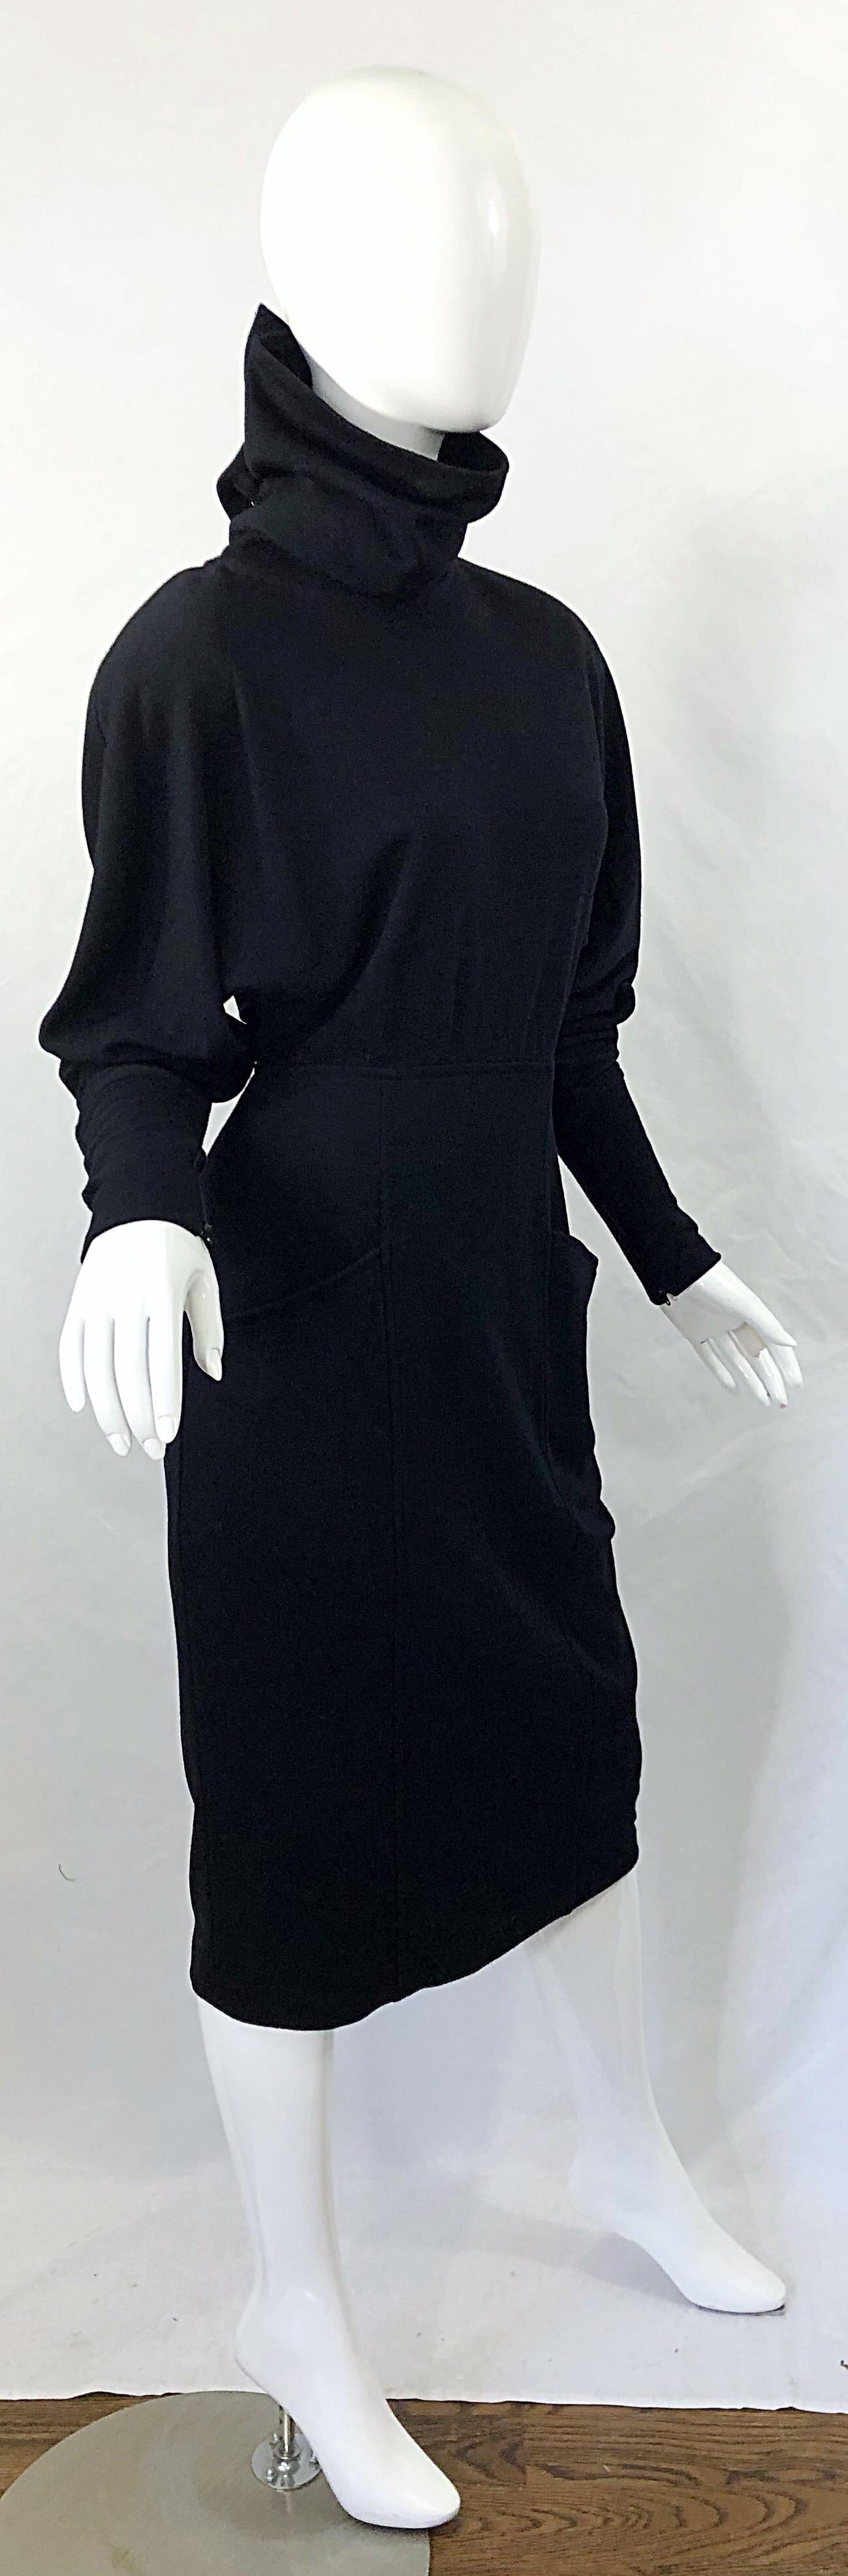 Gucci 1980s Avant Garde Black Size 42 Wool Vintage 80s Turtleneck Sweater Dress In Excellent Condition For Sale In San Diego, CA